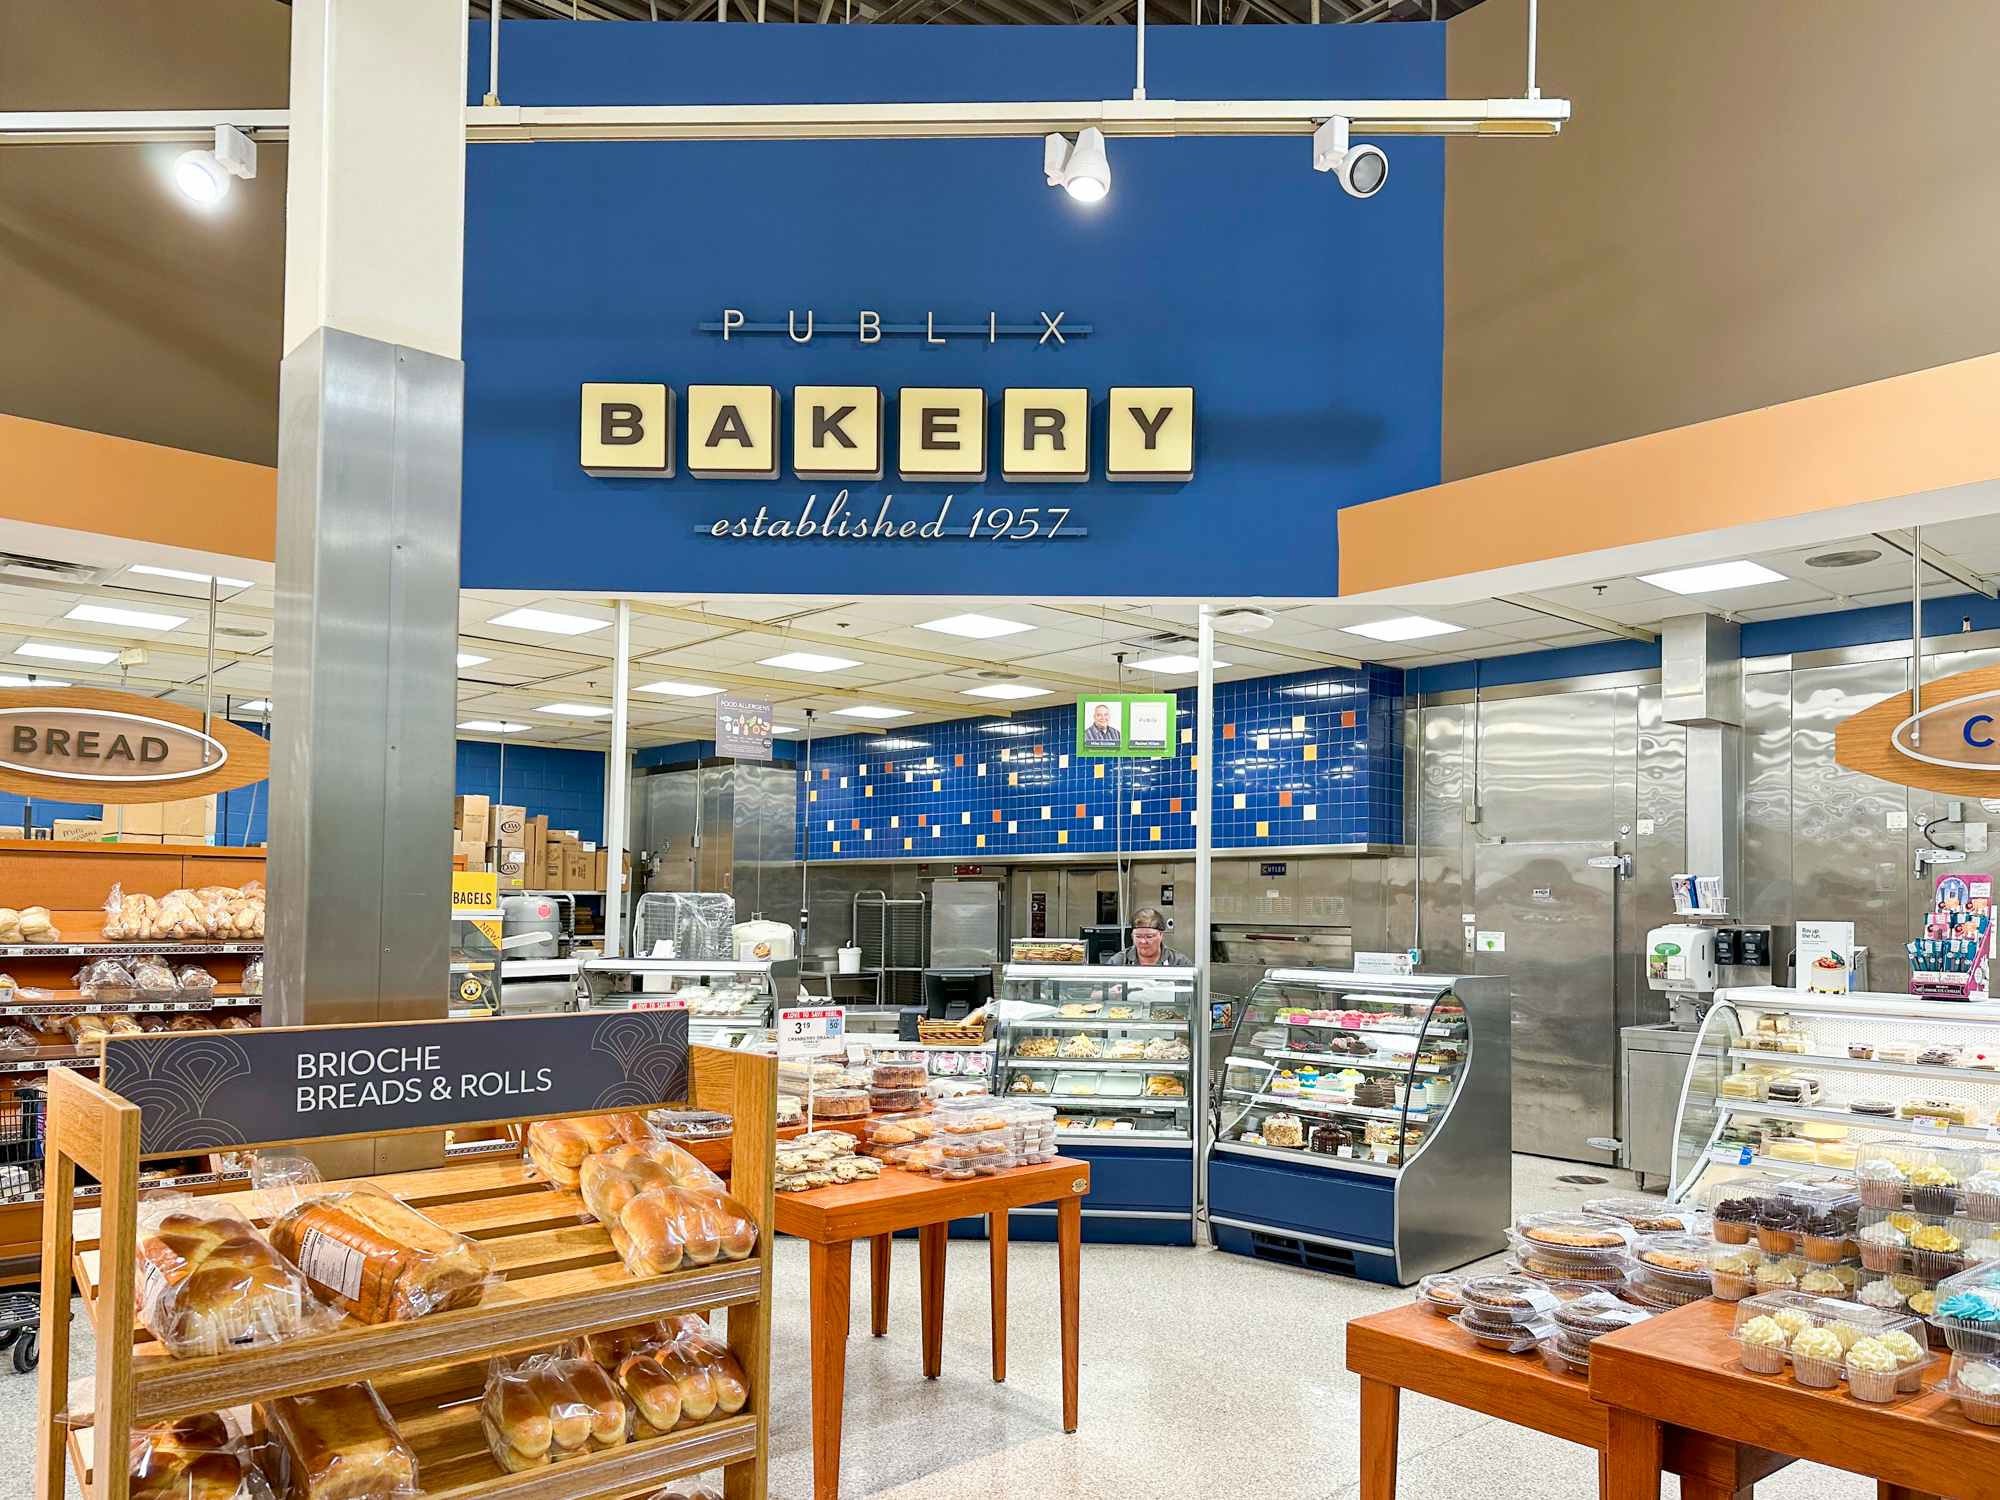 The bakery section inside a Publix store